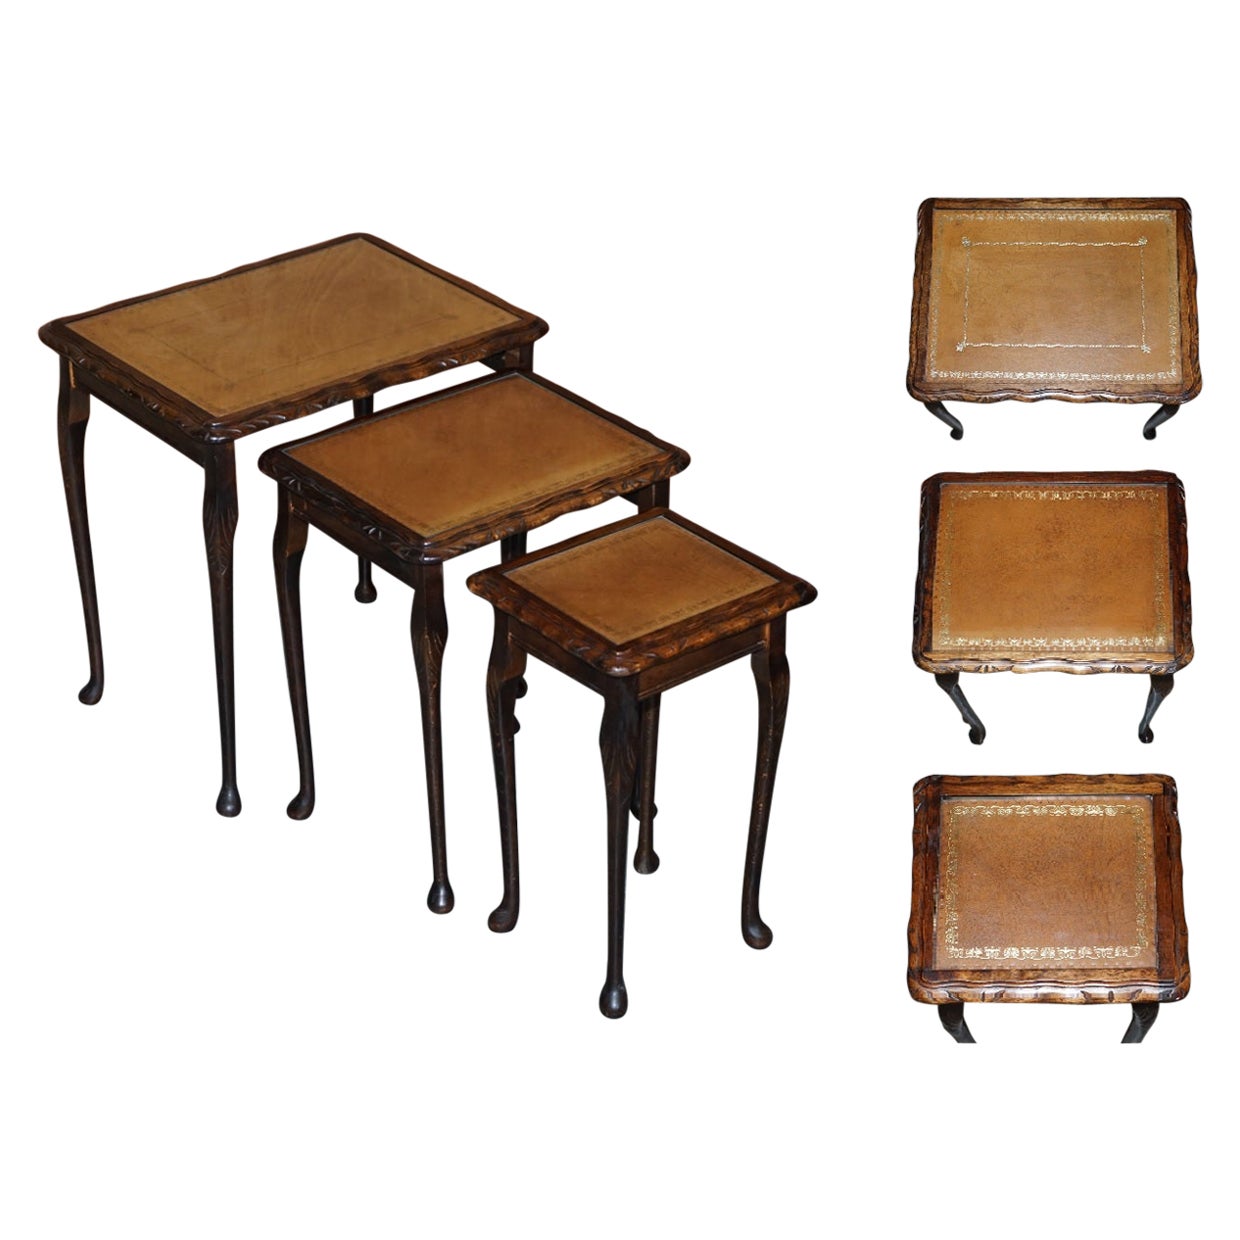 Vintage Nest of Three Hardwood with Gold Leaf Embossed Brown Leather Tops Tables